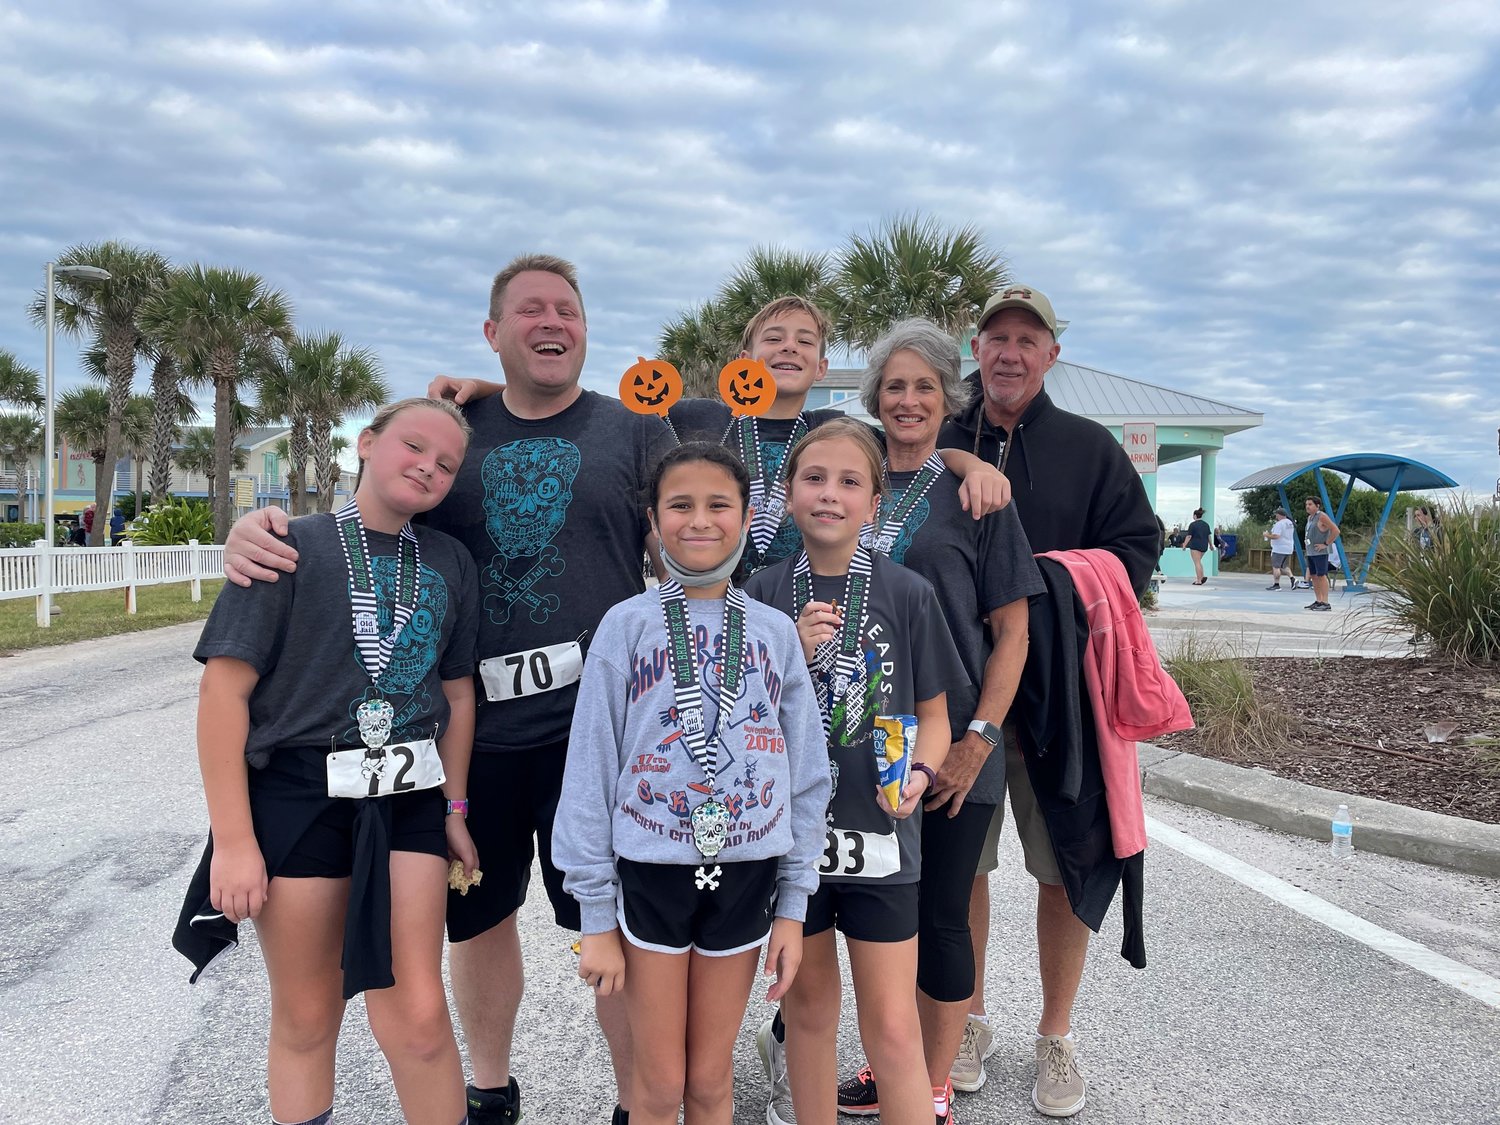 Dave Chatterton, general manager of Old Town Trolley Tours, with family and friends at the Jail Break 5K.